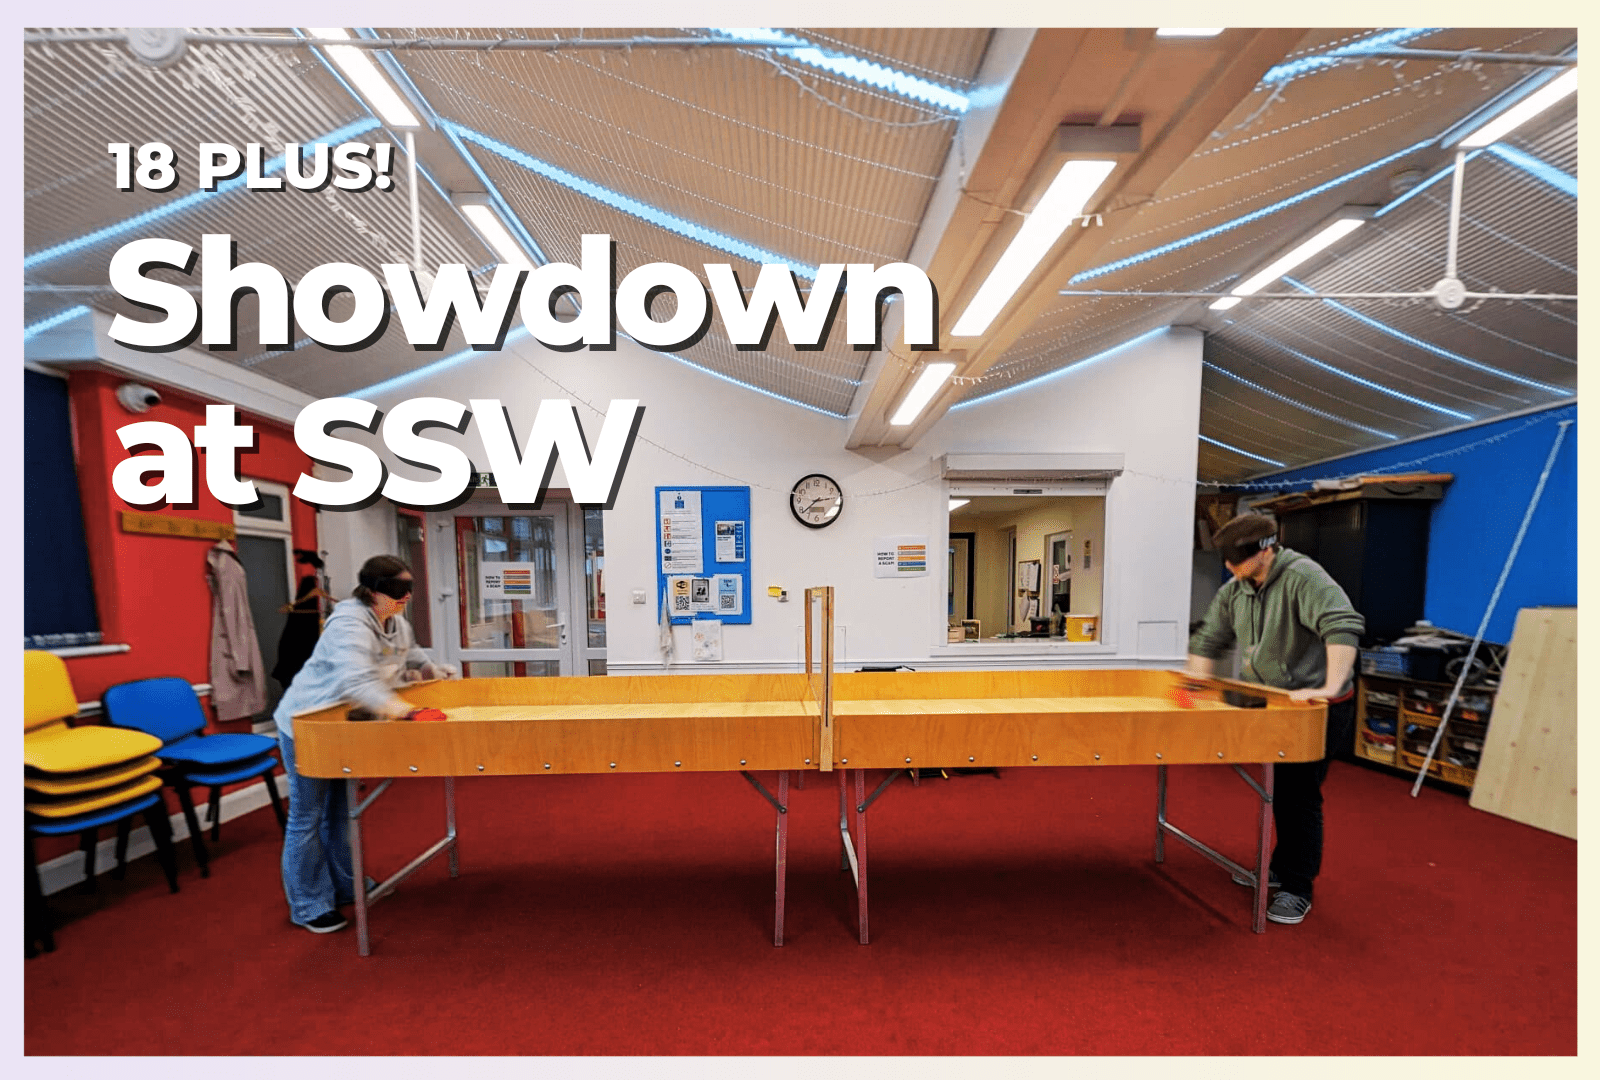 An image of 2 people playing Showdown with the text '18 Plus, Showdown at SSW' overlaid.